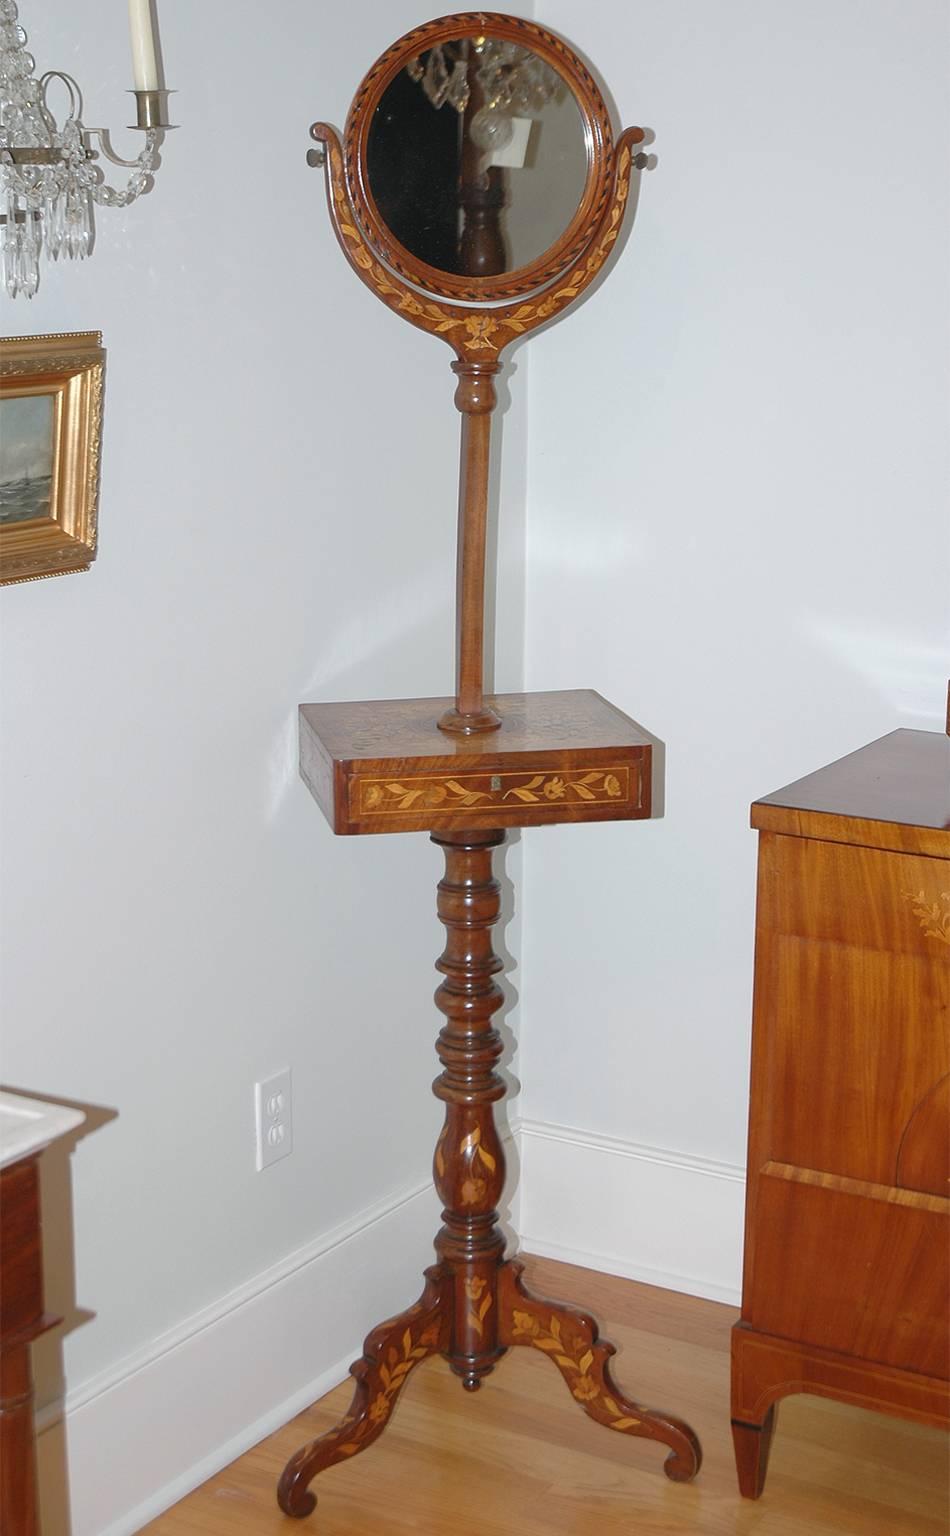 An exceptionally beautiful shaving stand in mahogany with marquetry in tulipwood and kingwood. Round mirror pivots and can be adjusted to the correct height. Turned column rests on tripod pedestal base. Holland, circa 1835. 
Measures: 20” wide, 18”